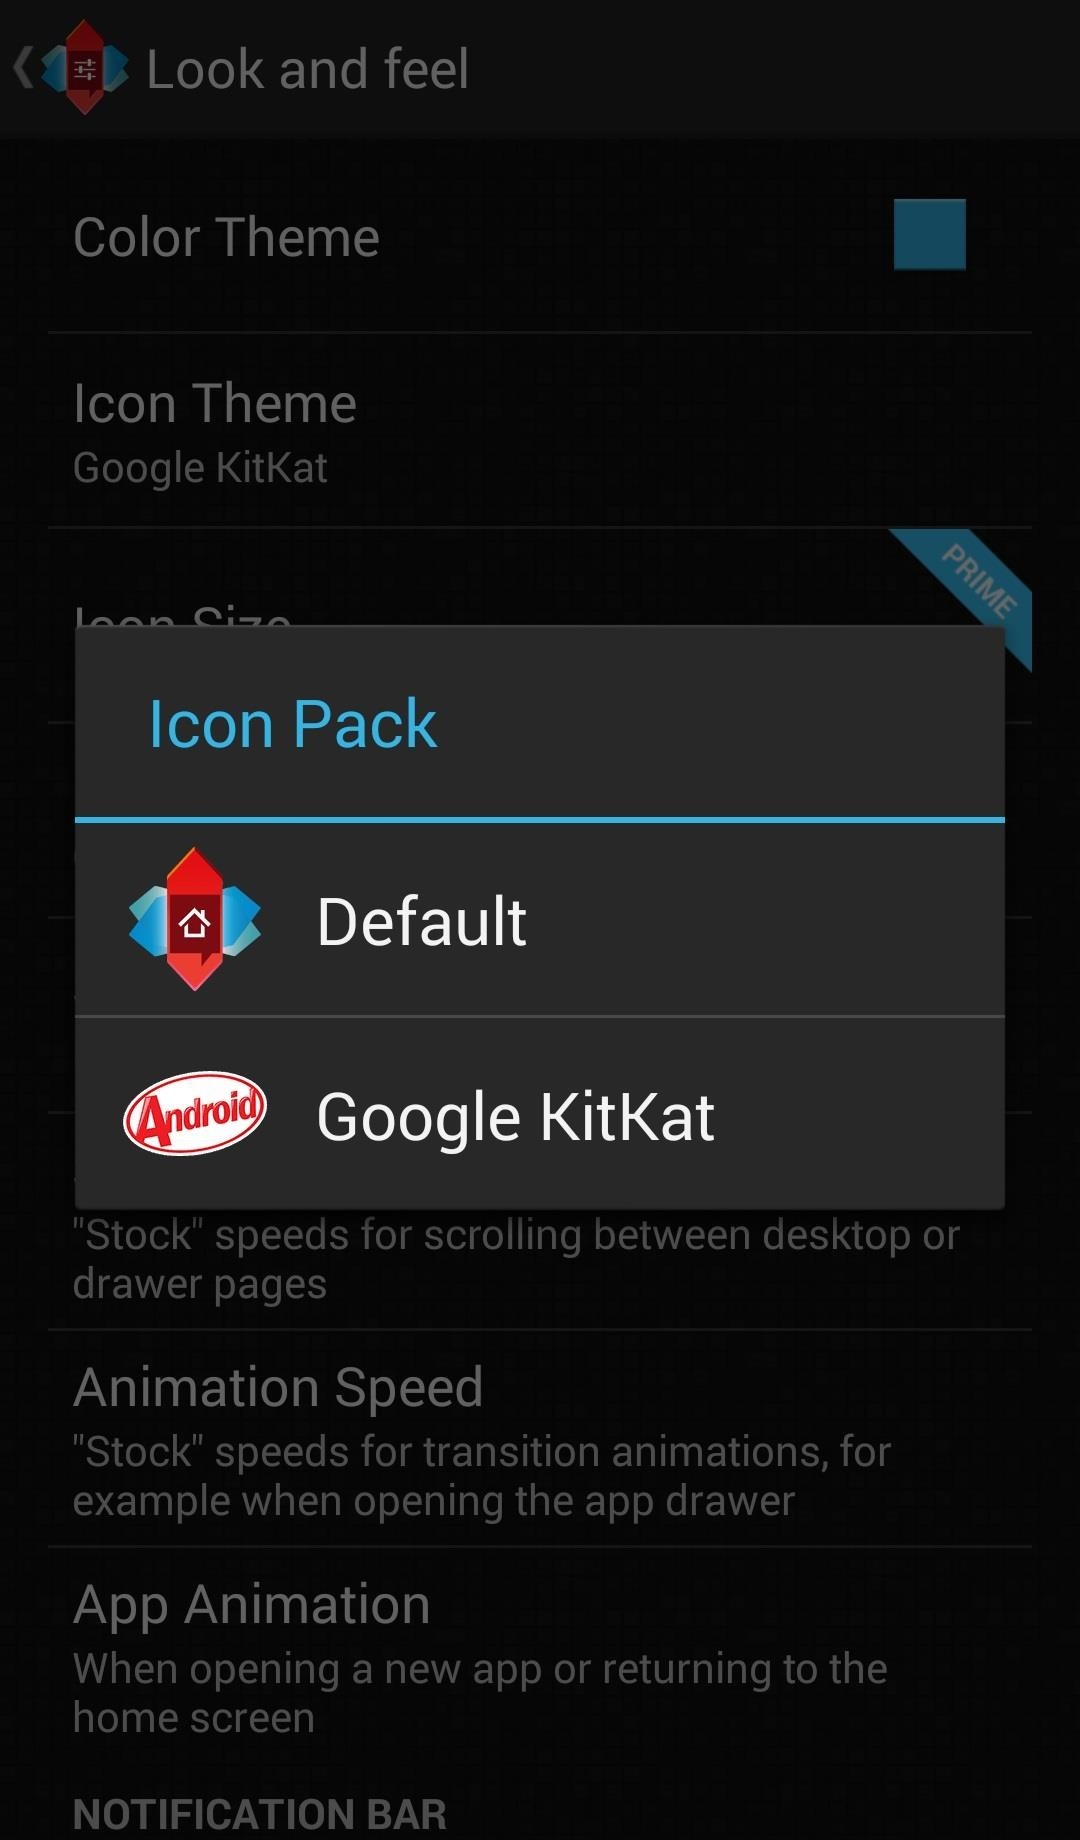 How to Make Your HTC One Feel Like a Nexus 5 with Android 4.4 KitKat